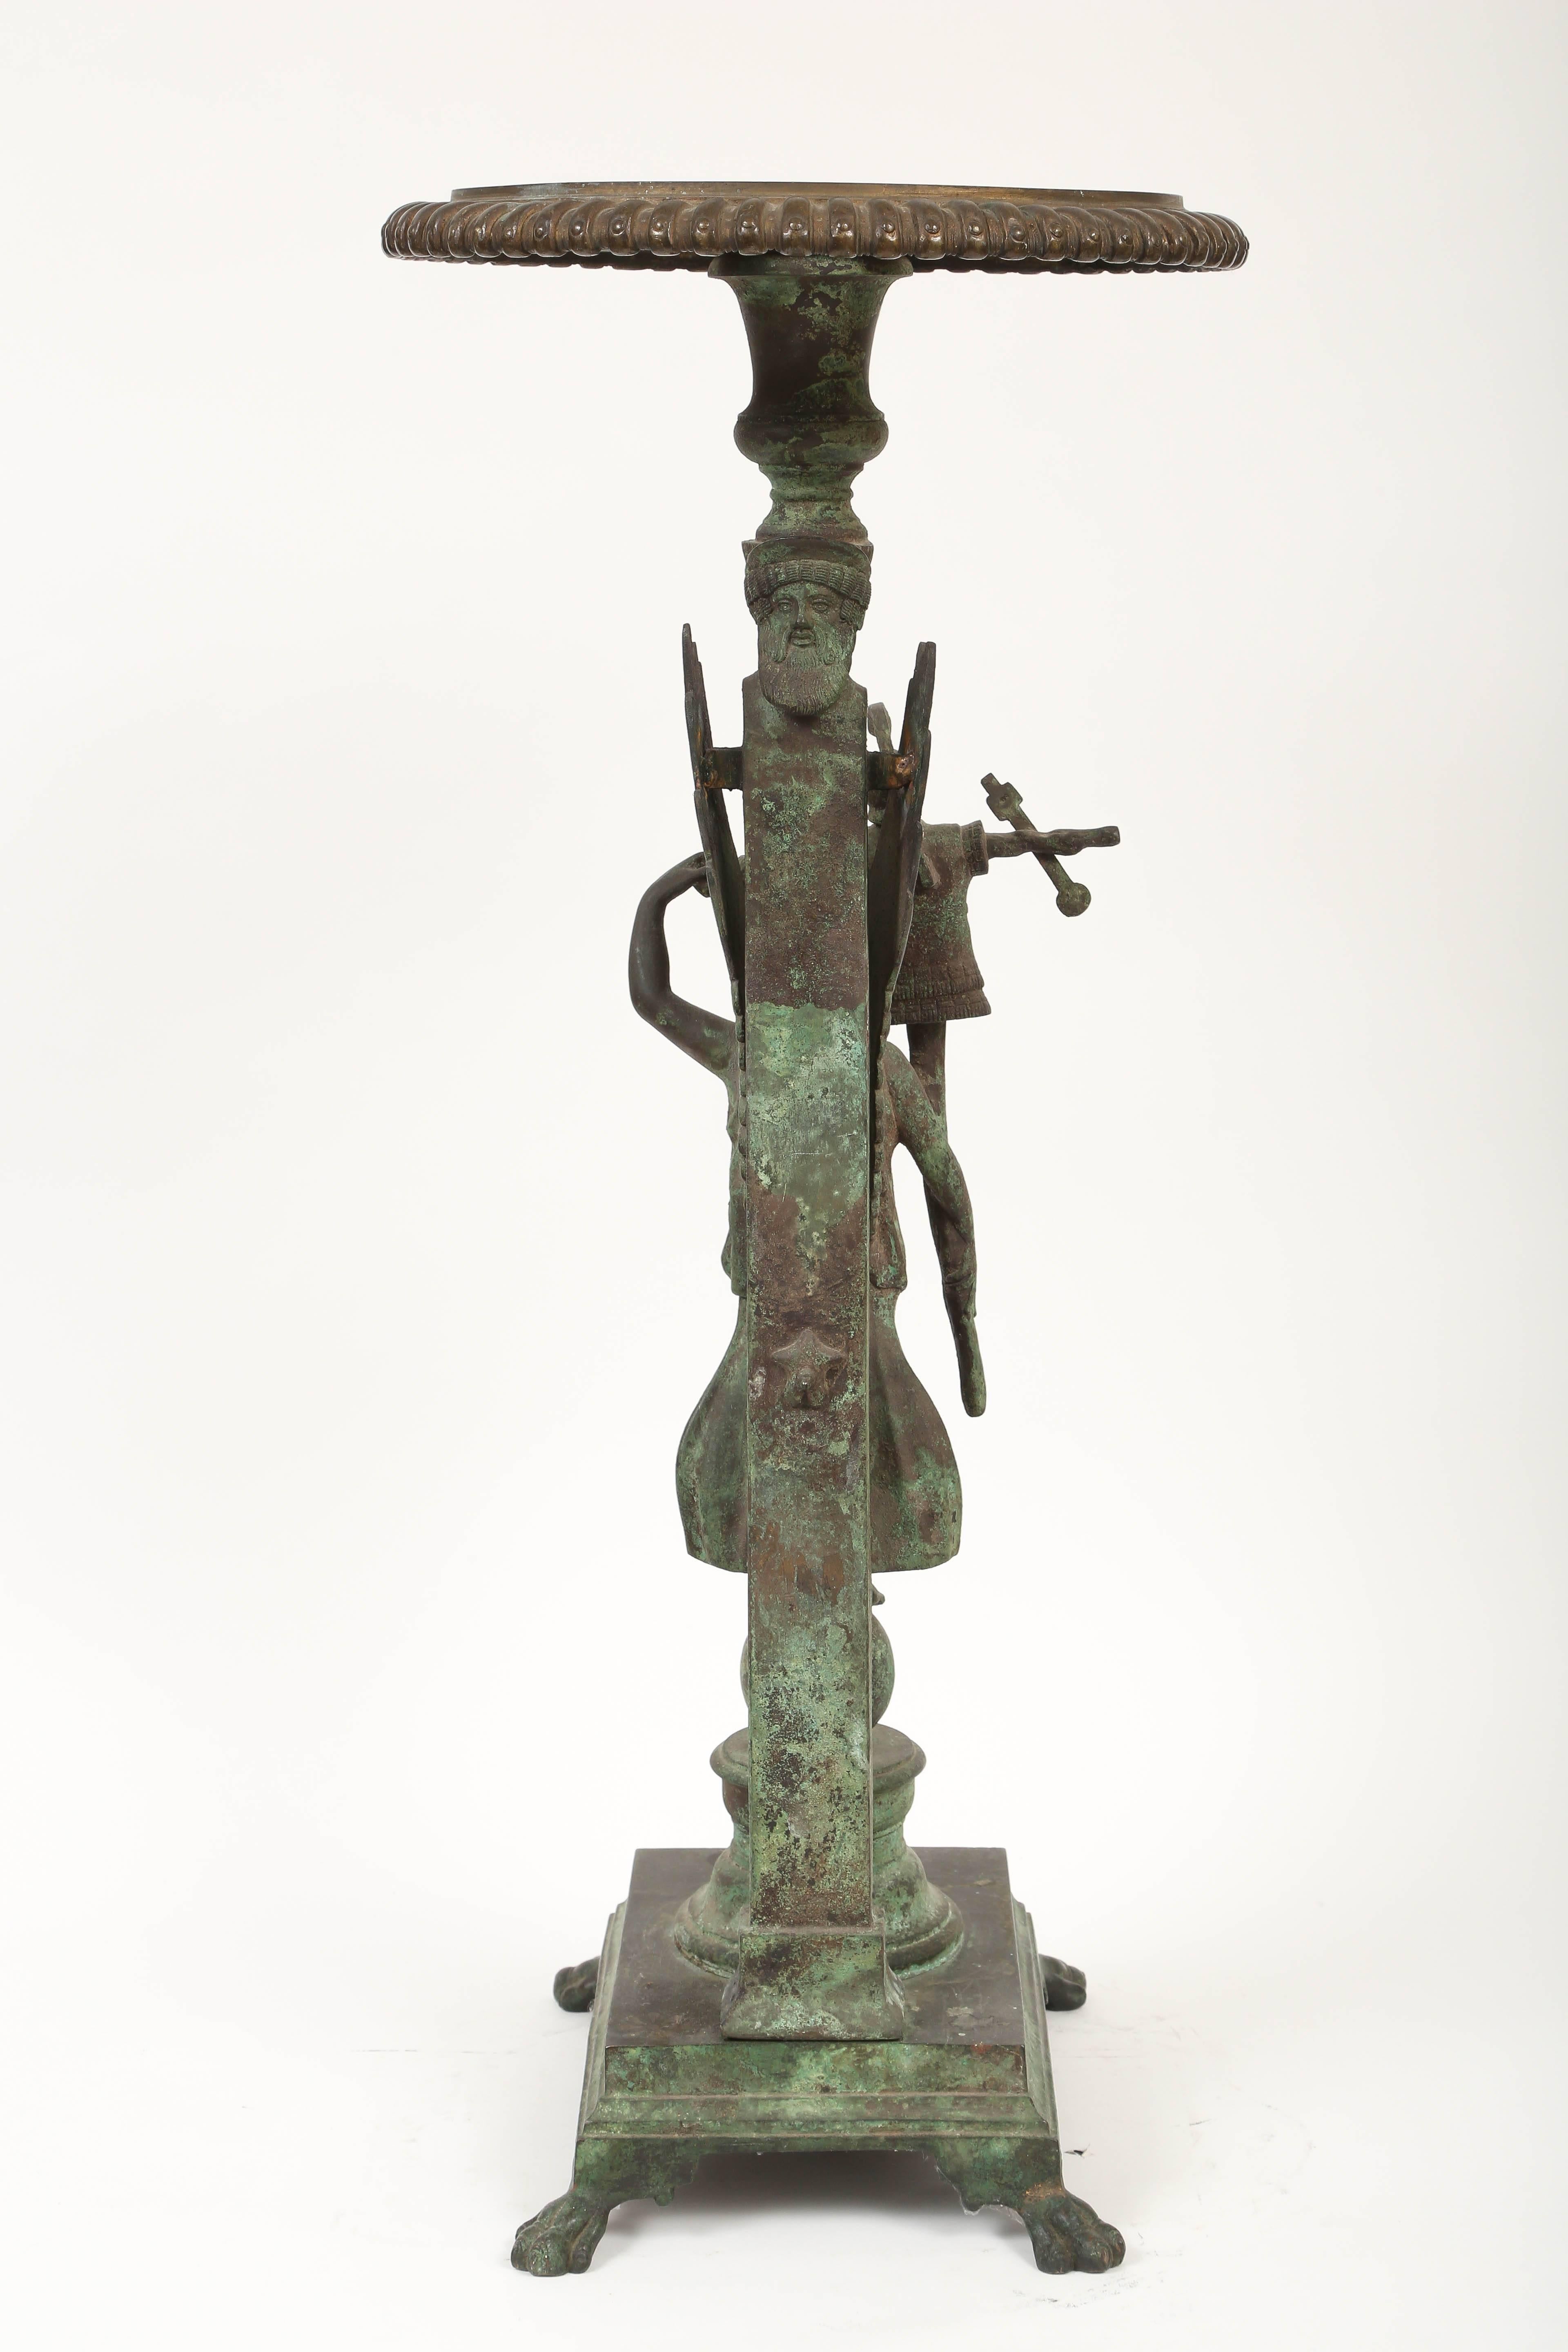 Patinated Pompeii Verdigris Bronze Table with Nike and Trophy, Italian, 19th Century